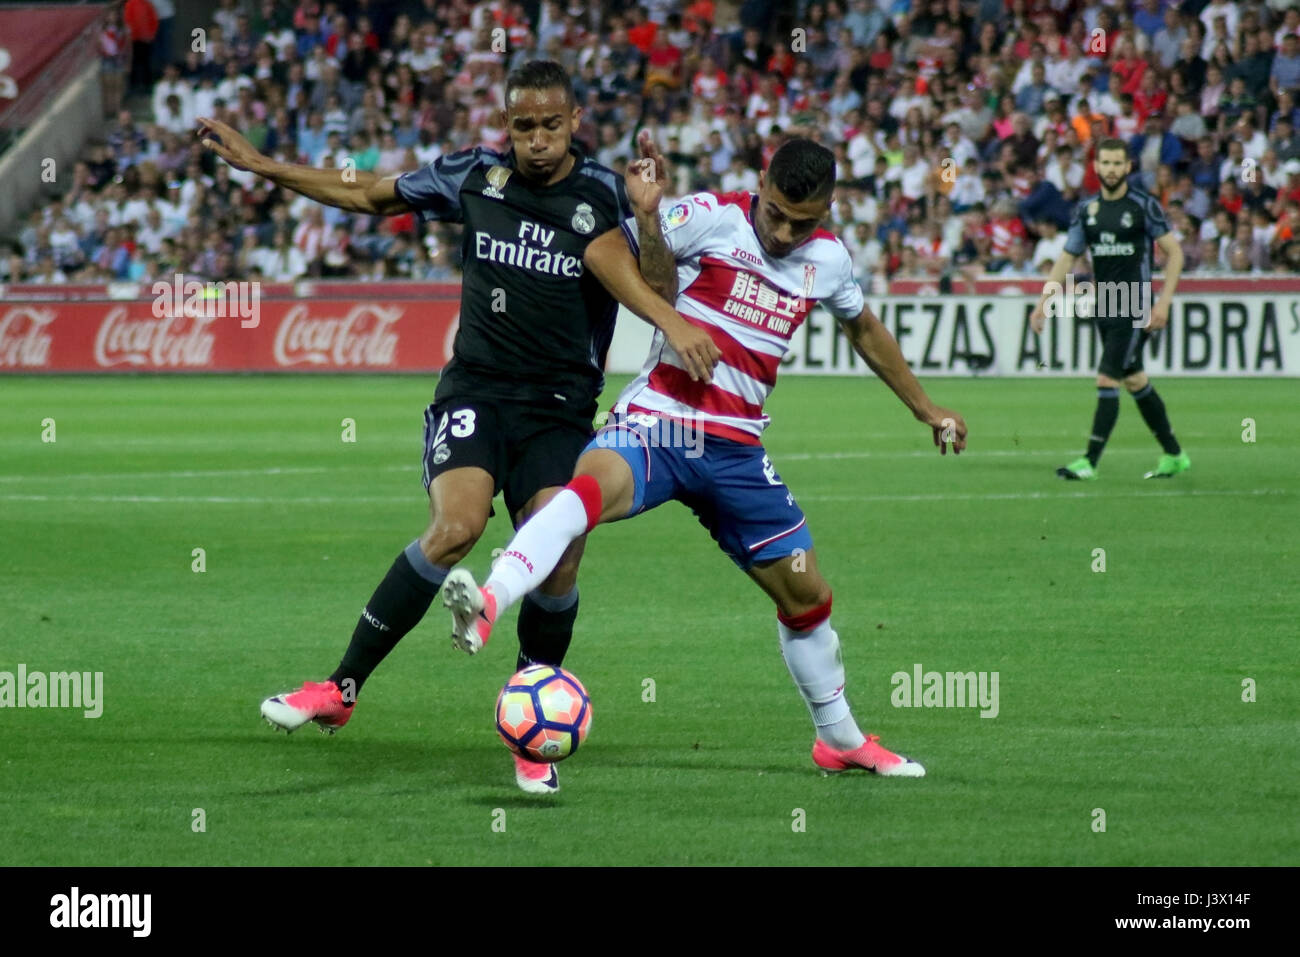 Granada, Spain. May 6, 2017 - Danilo and Andreas Pereira. Real Madrid defeated Granada 0-4 with goals scored by James Rodriguez (3 and 10 minute) and Alvaro Morata (30 and 35 minute). Matchday 36 game played in Los Nuevos Carmenes Stadium. Photo by Jose Velasco | PHOTO MEDIA EXPRESS Stock Photo